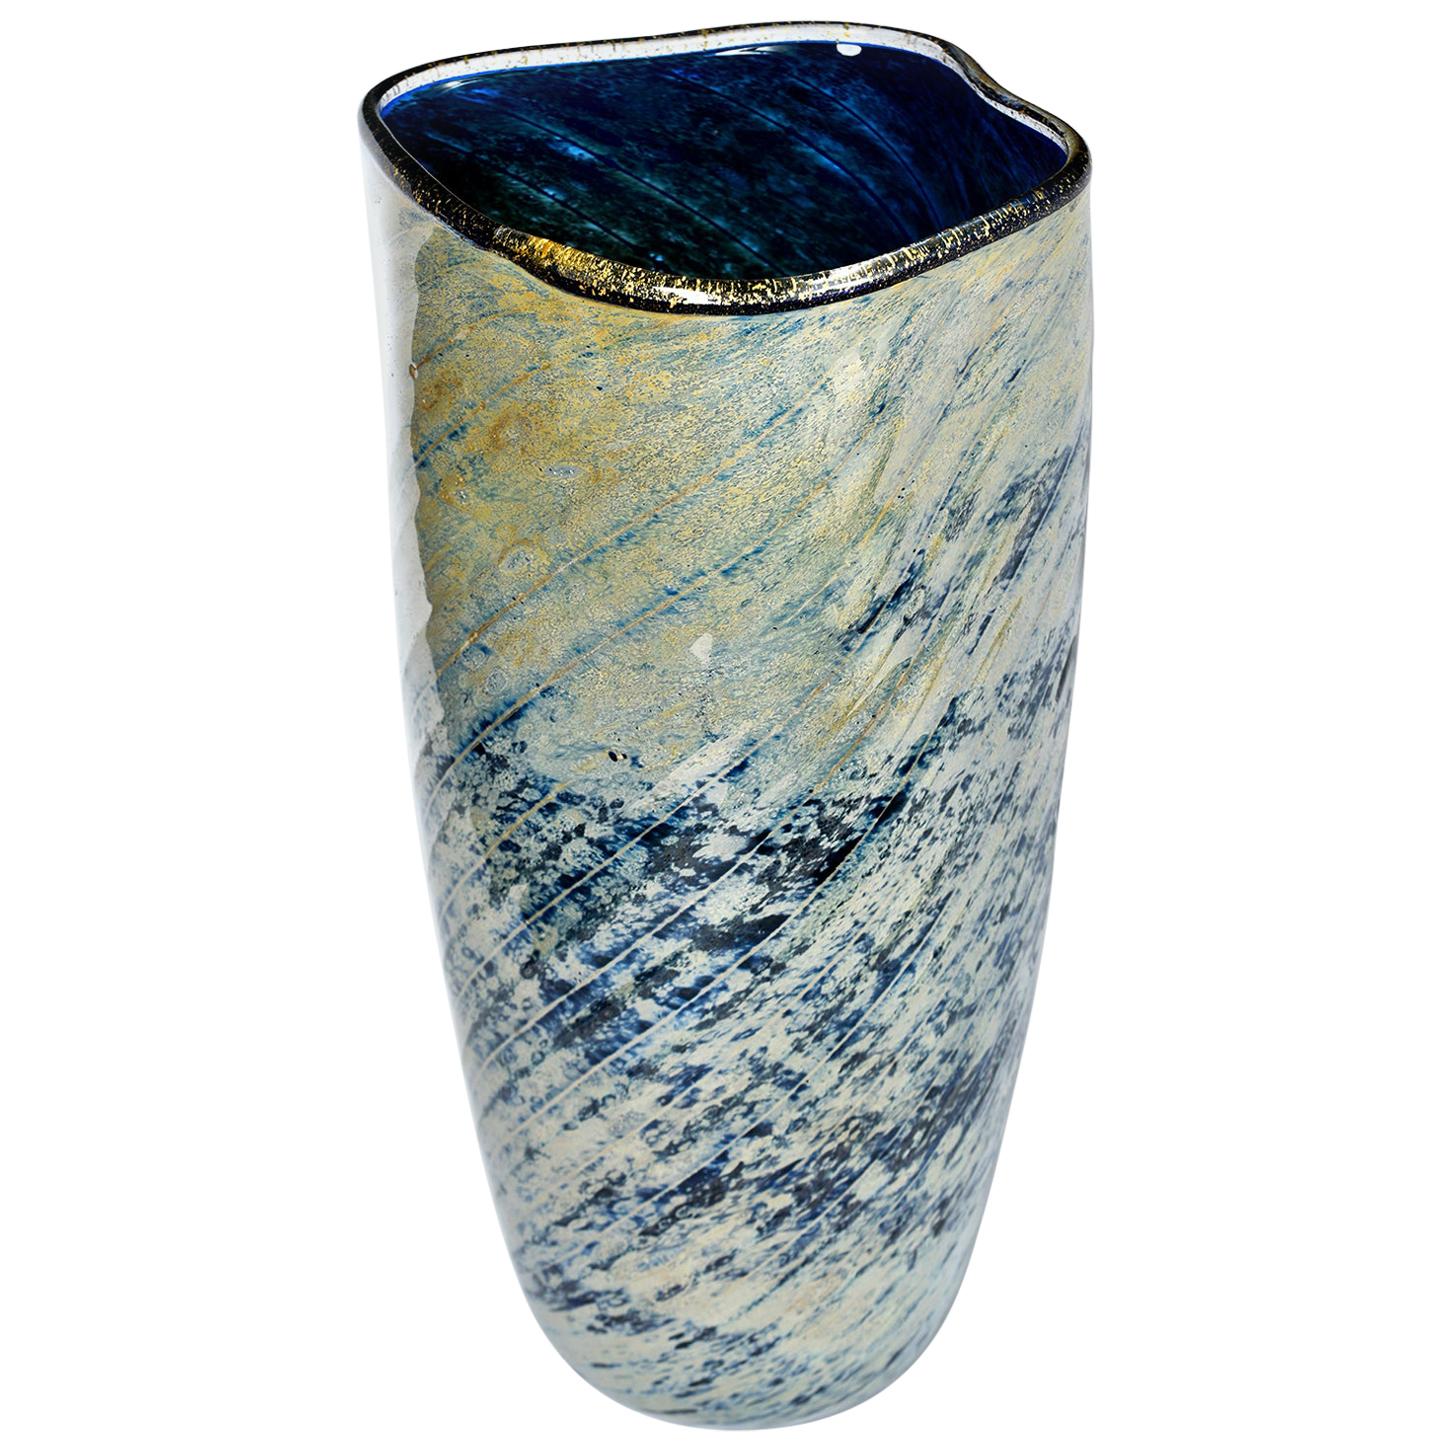 Tall Blue and Green Art Glass Vase with Black Lip